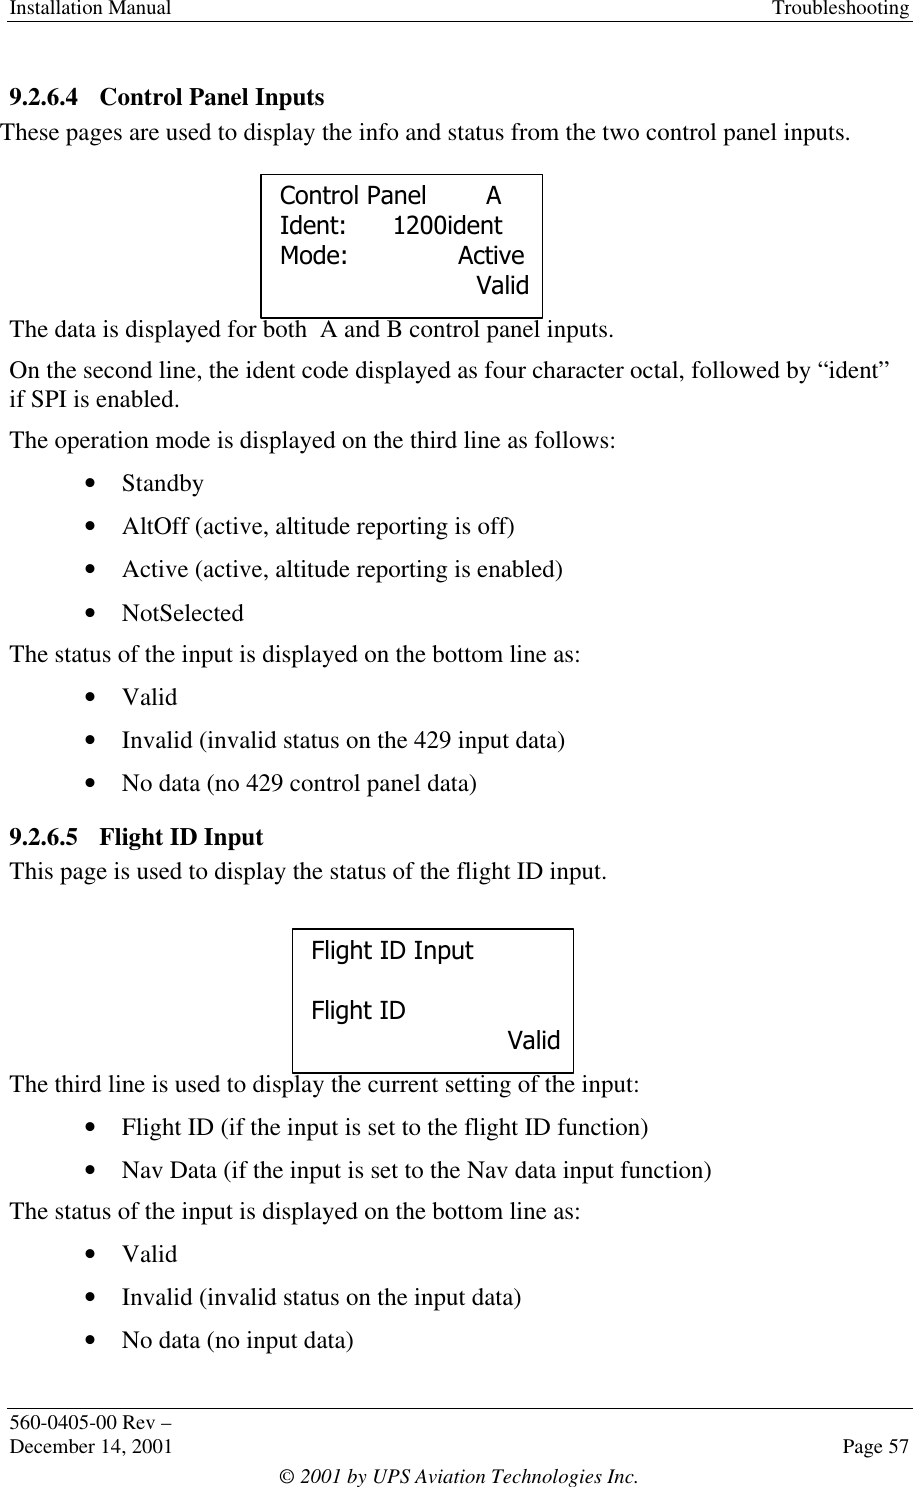 Installation Manual Troubleshooting560-0405-00 Rev –December 14, 2001 Page 57© 2001 by UPS Aviation Technologies Inc.9.2.6.4 Control Panel InputsThese pages are used to display the info and status from the two control panel inputs.The data is displayed for both  A and B control panel inputs.On the second line, the ident code displayed as four character octal, followed by “ident”if SPI is enabled.The operation mode is displayed on the third line as follows:• Standby• AltOff (active, altitude reporting is off)• Active (active, altitude reporting is enabled)• NotSelectedThe status of the input is displayed on the bottom line as:• Valid• Invalid (invalid status on the 429 input data)• No data (no 429 control panel data)9.2.6.5 Flight ID InputThis page is used to display the status of the flight ID input.The third line is used to display the current setting of the input:• Flight ID (if the input is set to the flight ID function)• Nav Data (if the input is set to the Nav data input function)The status of the input is displayed on the bottom line as:• Valid• Invalid (invalid status on the input data)• No data (no input data)Control PanelAIdent: 1200identMode: ActiveValidFlight ID InputFlight IDValid